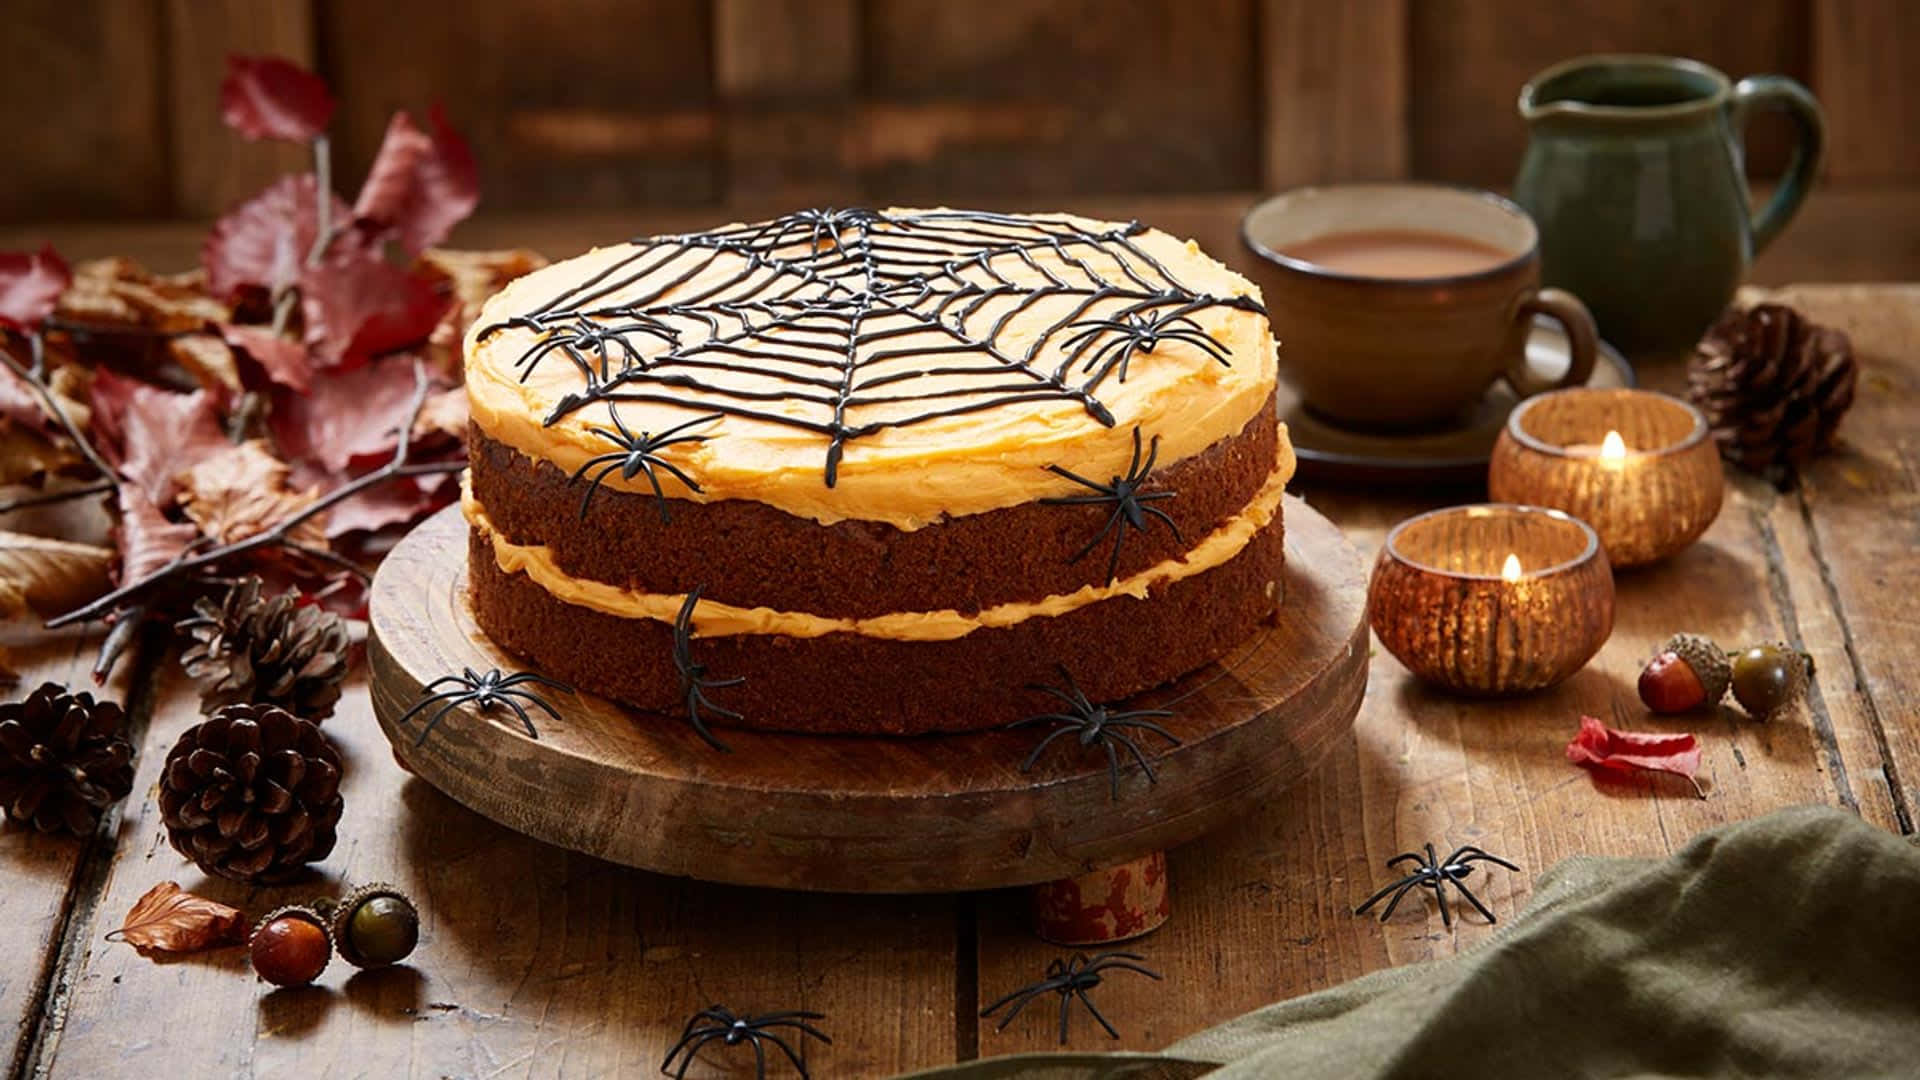 Celebrate the spookiest night of the year with this delicious Halloween cake! Wallpaper